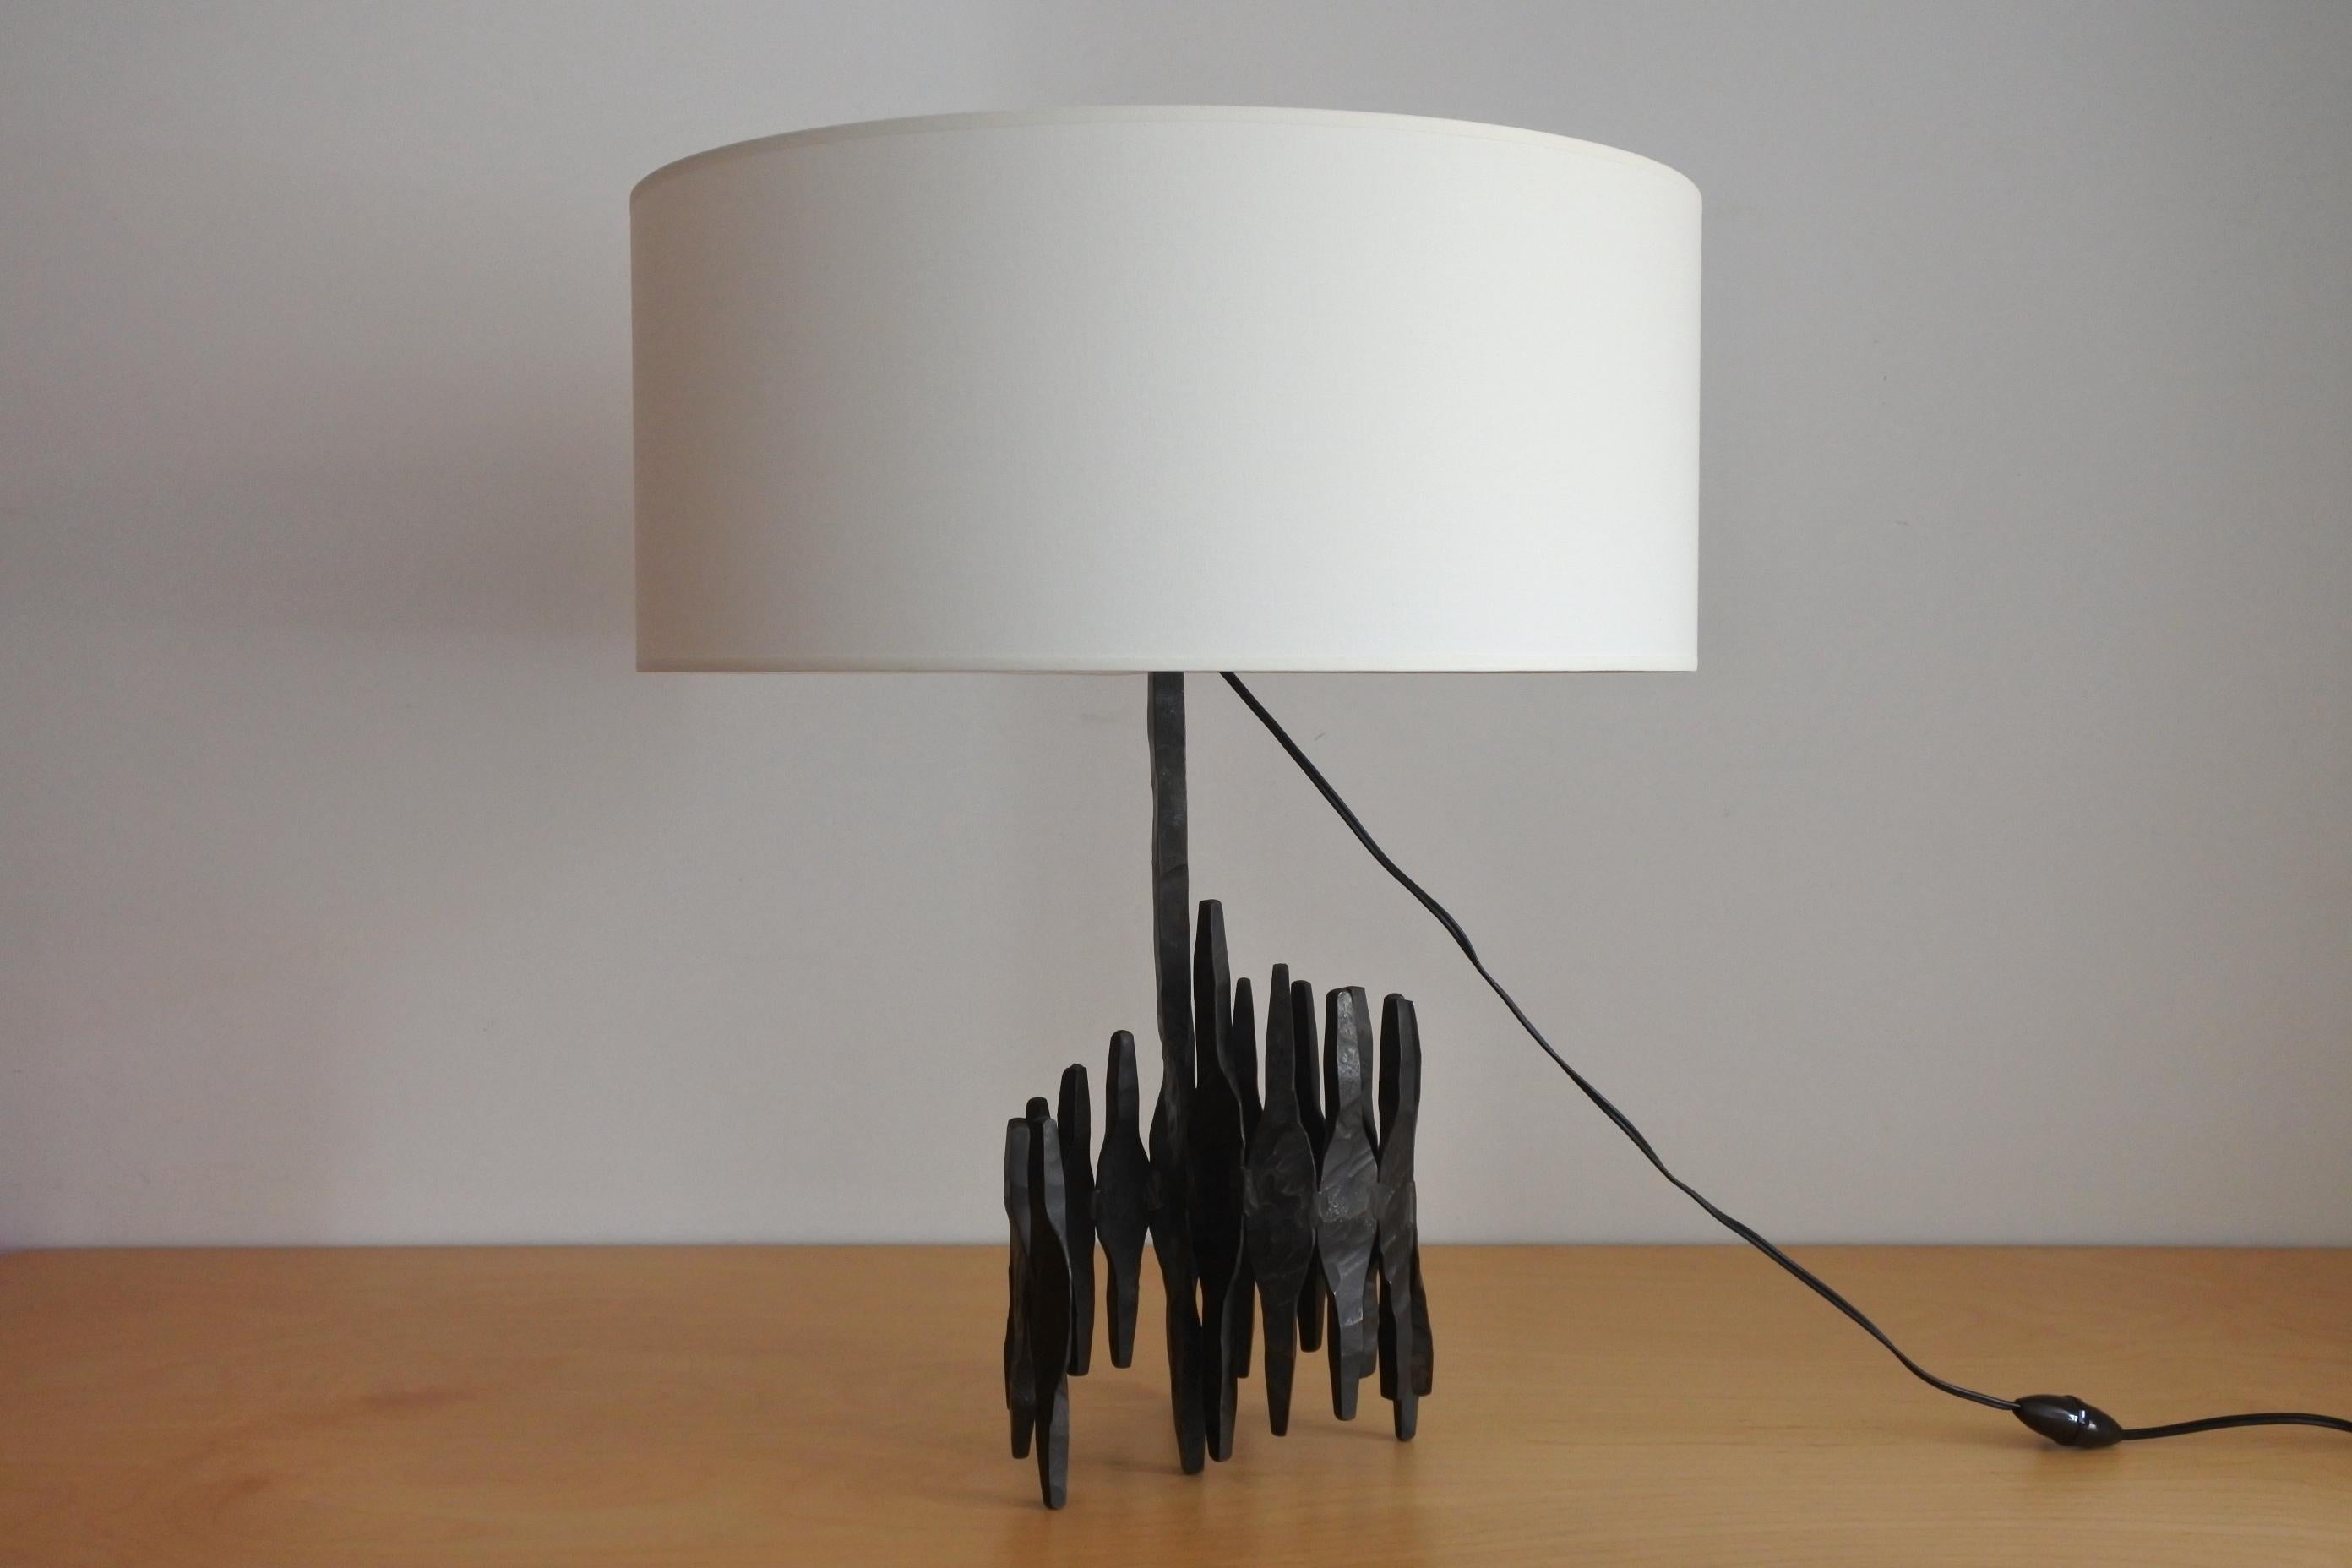 Brutalist architectural table lamp.
Patinated wrought iron and fabric shade.
Made in France in the 1960s.

1 x B22 socket, original cabling, EU plug.